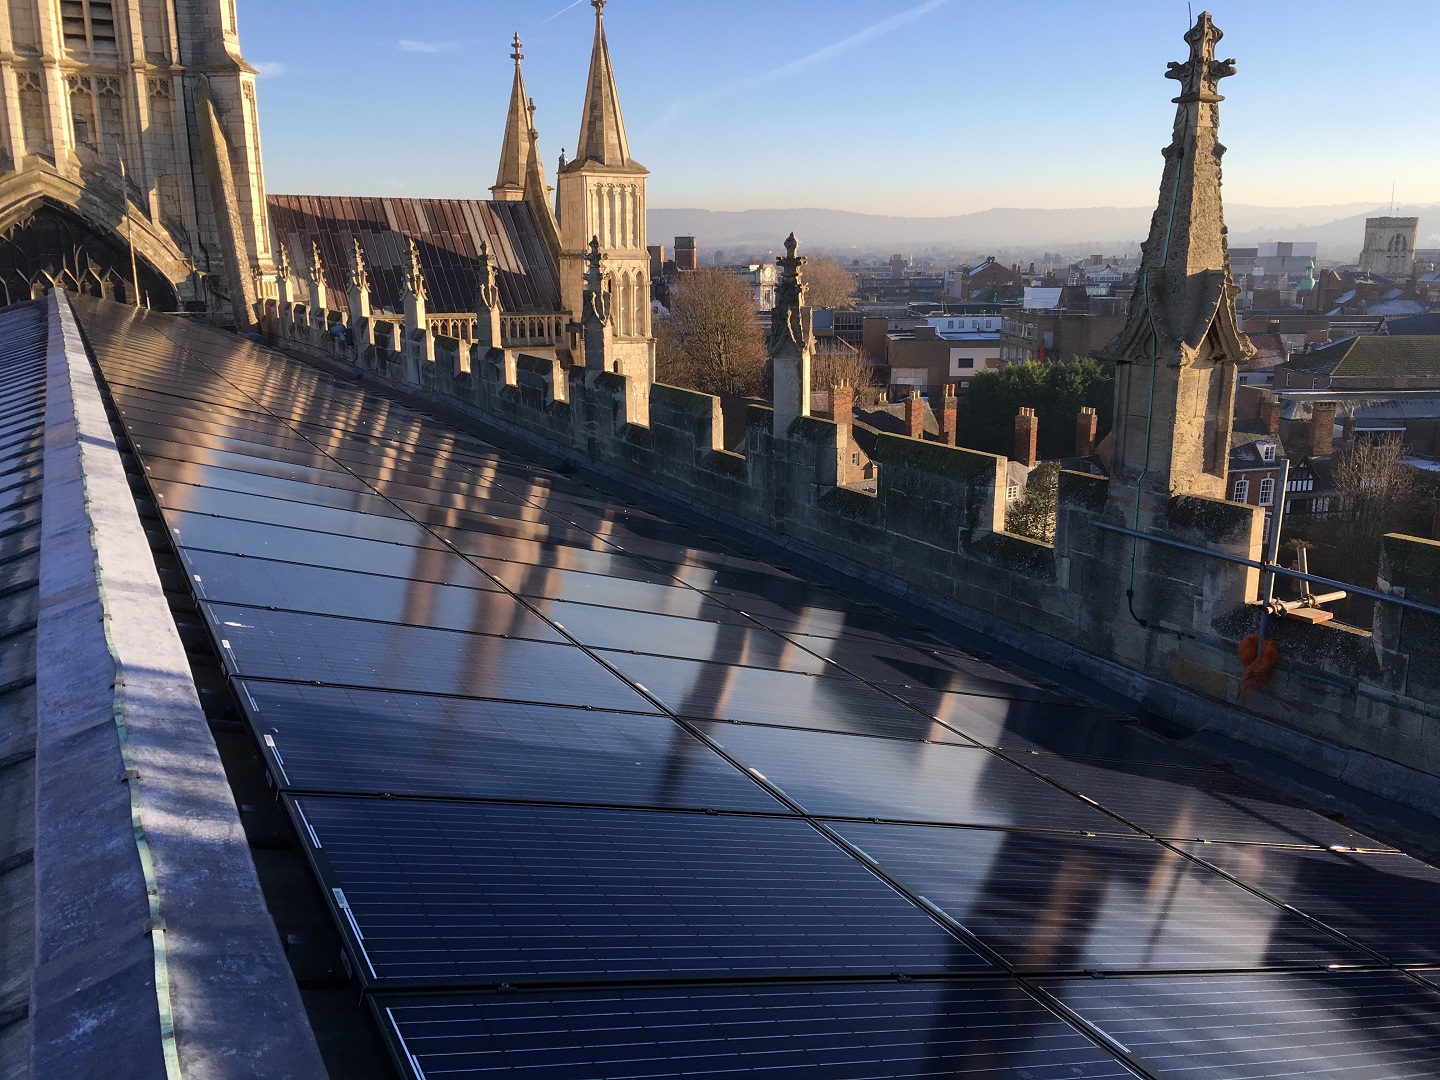 A close up view along the roof of the nave of Gloucester Cathedral showing the solar panels.